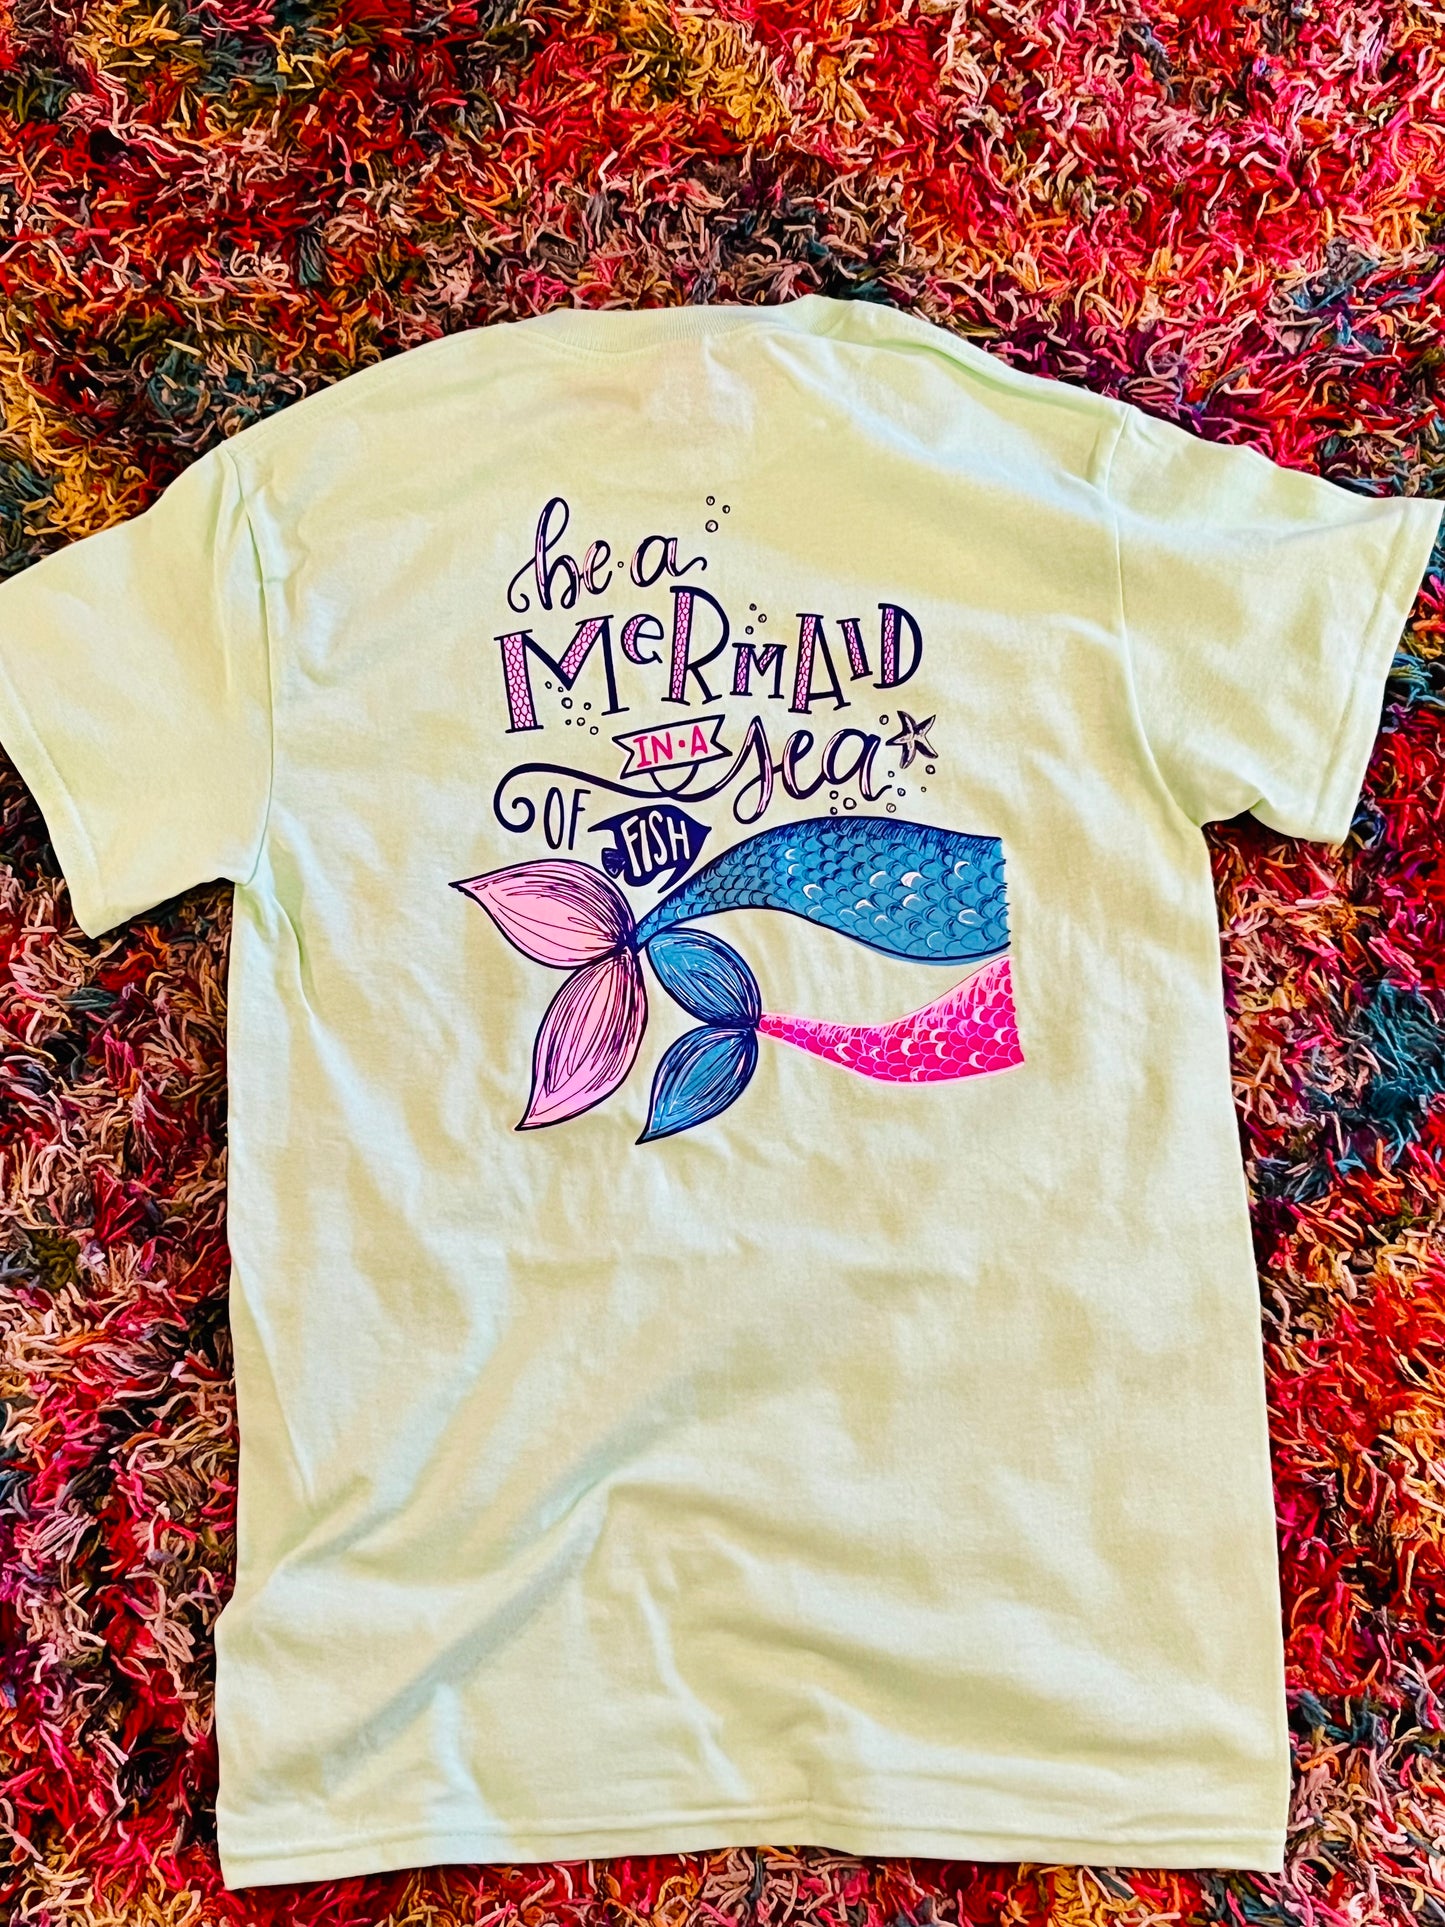 Tee of the Day- Be a Mermaid